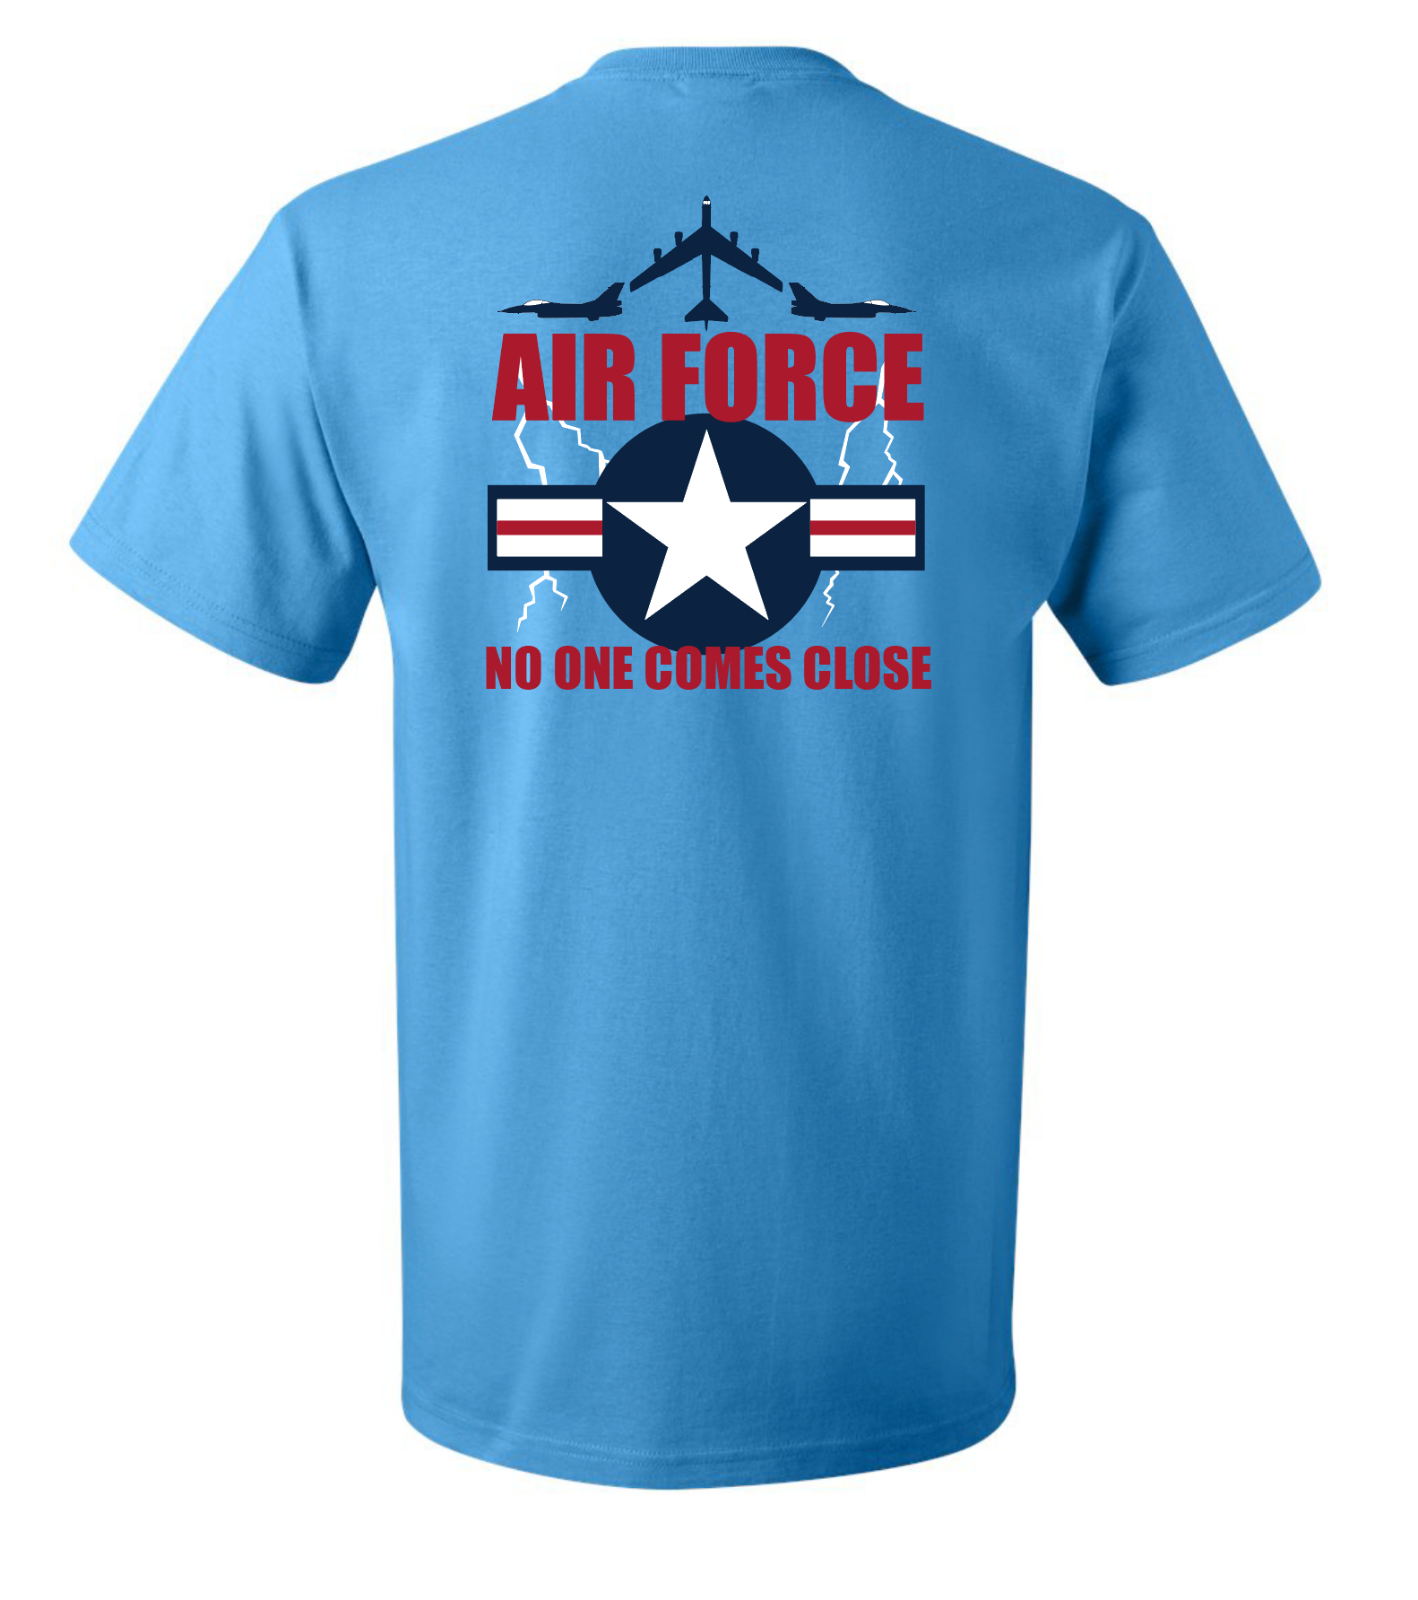 USAF Shirt US Airforce Wing Star Air Force T-shirt No One Comes Close